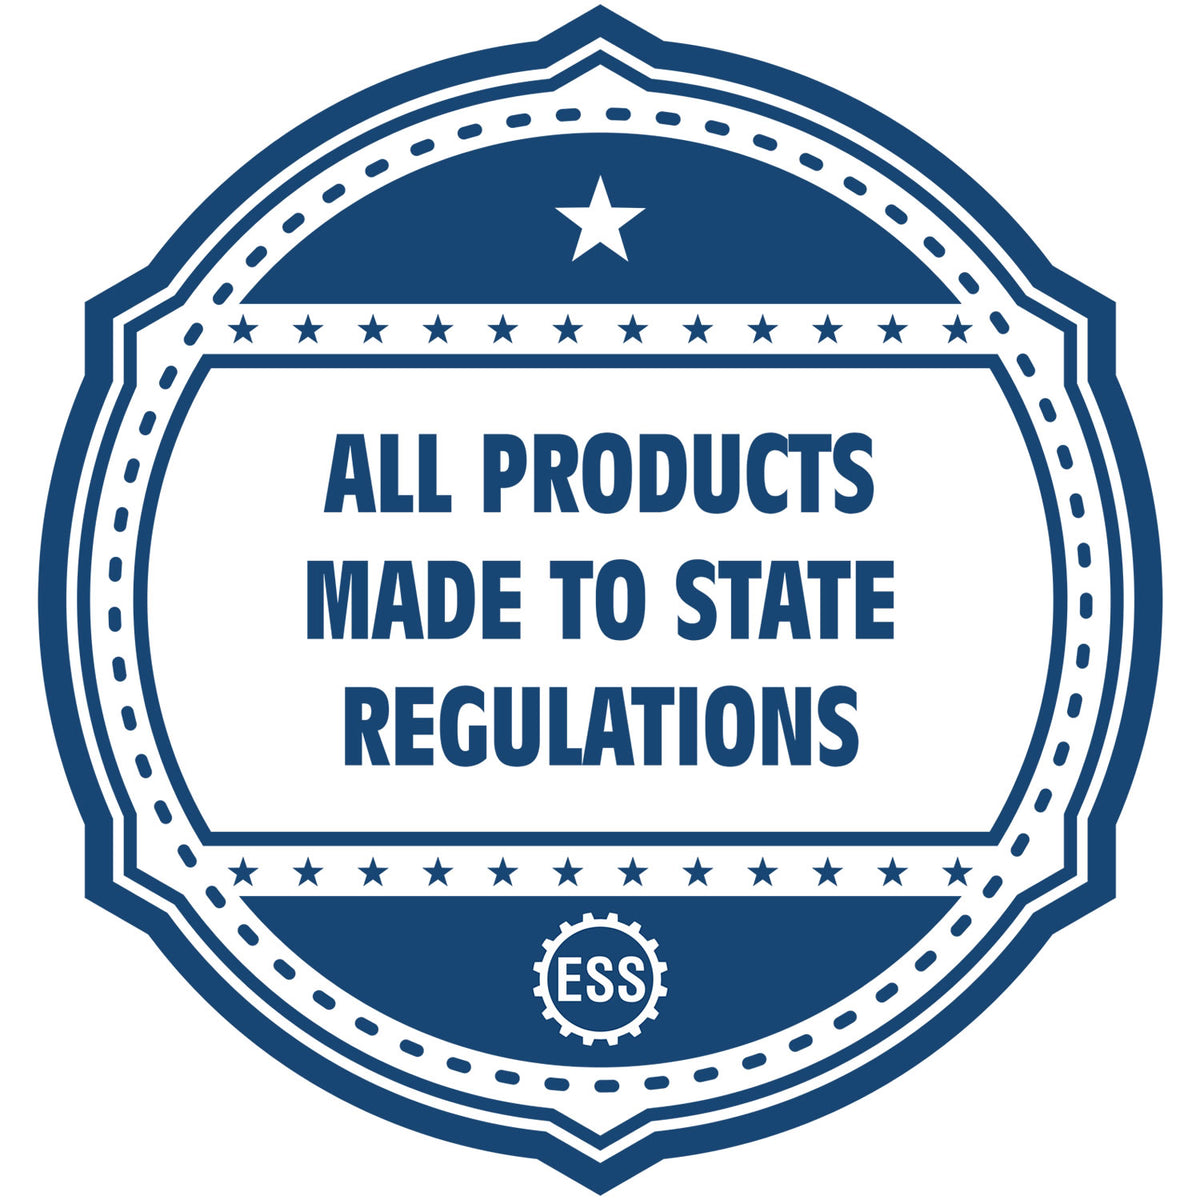 A blue icon or badge for the Hybrid Vermont Engineer Seal showing that this product is made in compliance with state regulations.